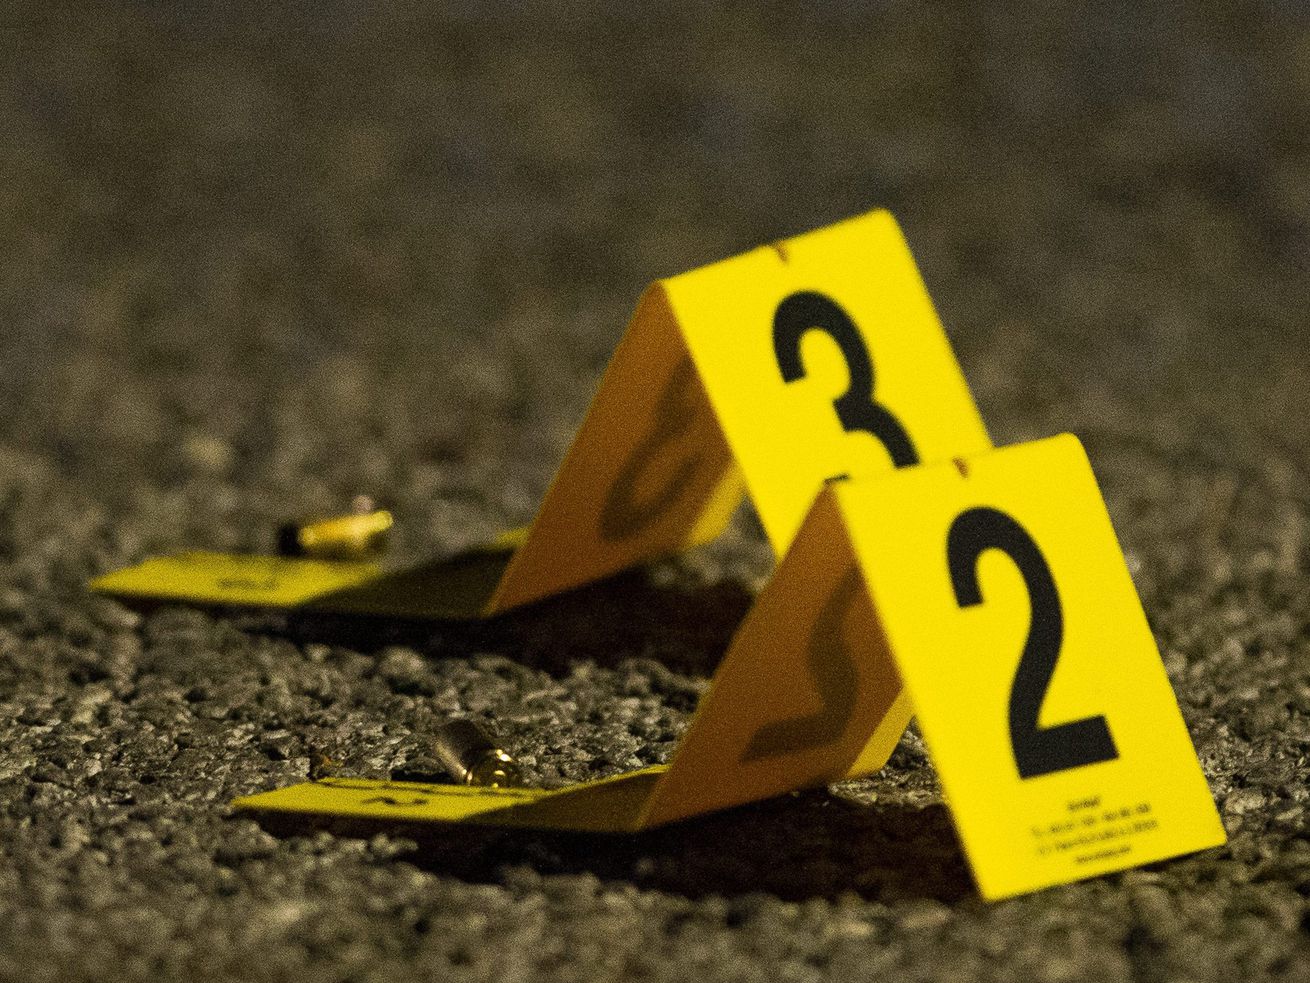 A man was fatally shot Oct. 25, 2020, in the 1900 block of South St. Louis Avenue.